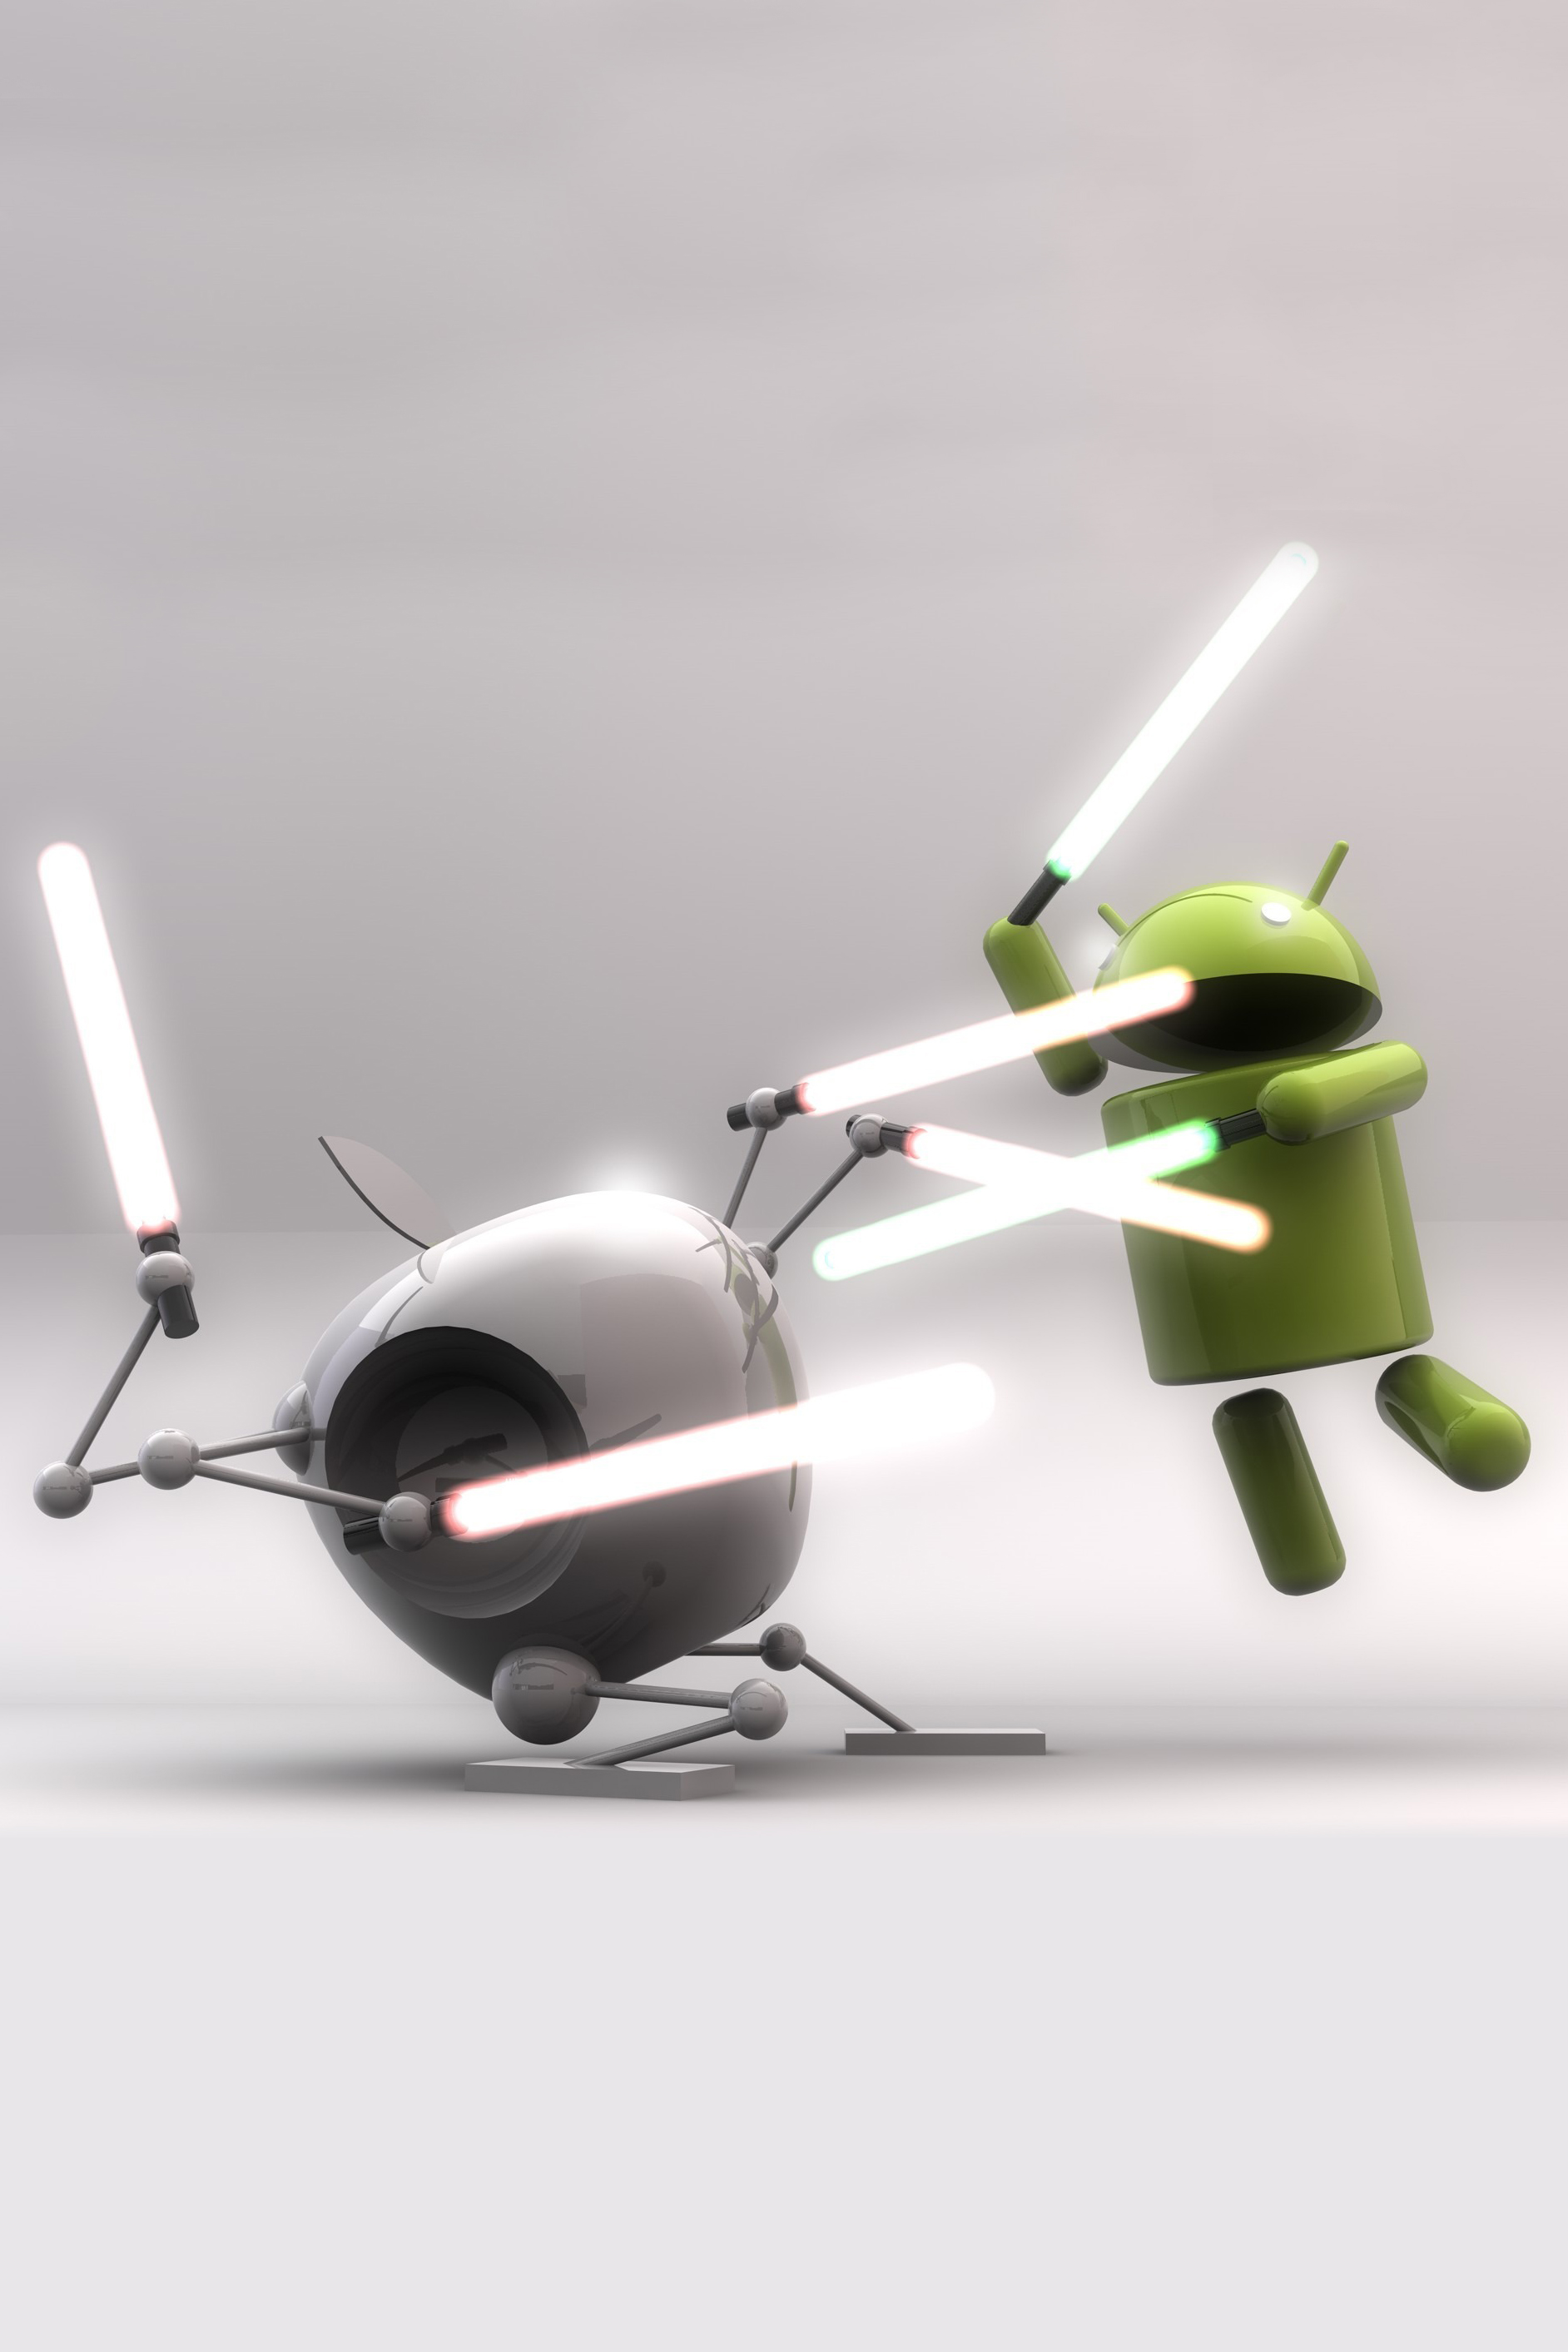 3d Android Apple Light Saber Fight Android Wallpaper - Android Vs Apple , HD Wallpaper & Backgrounds